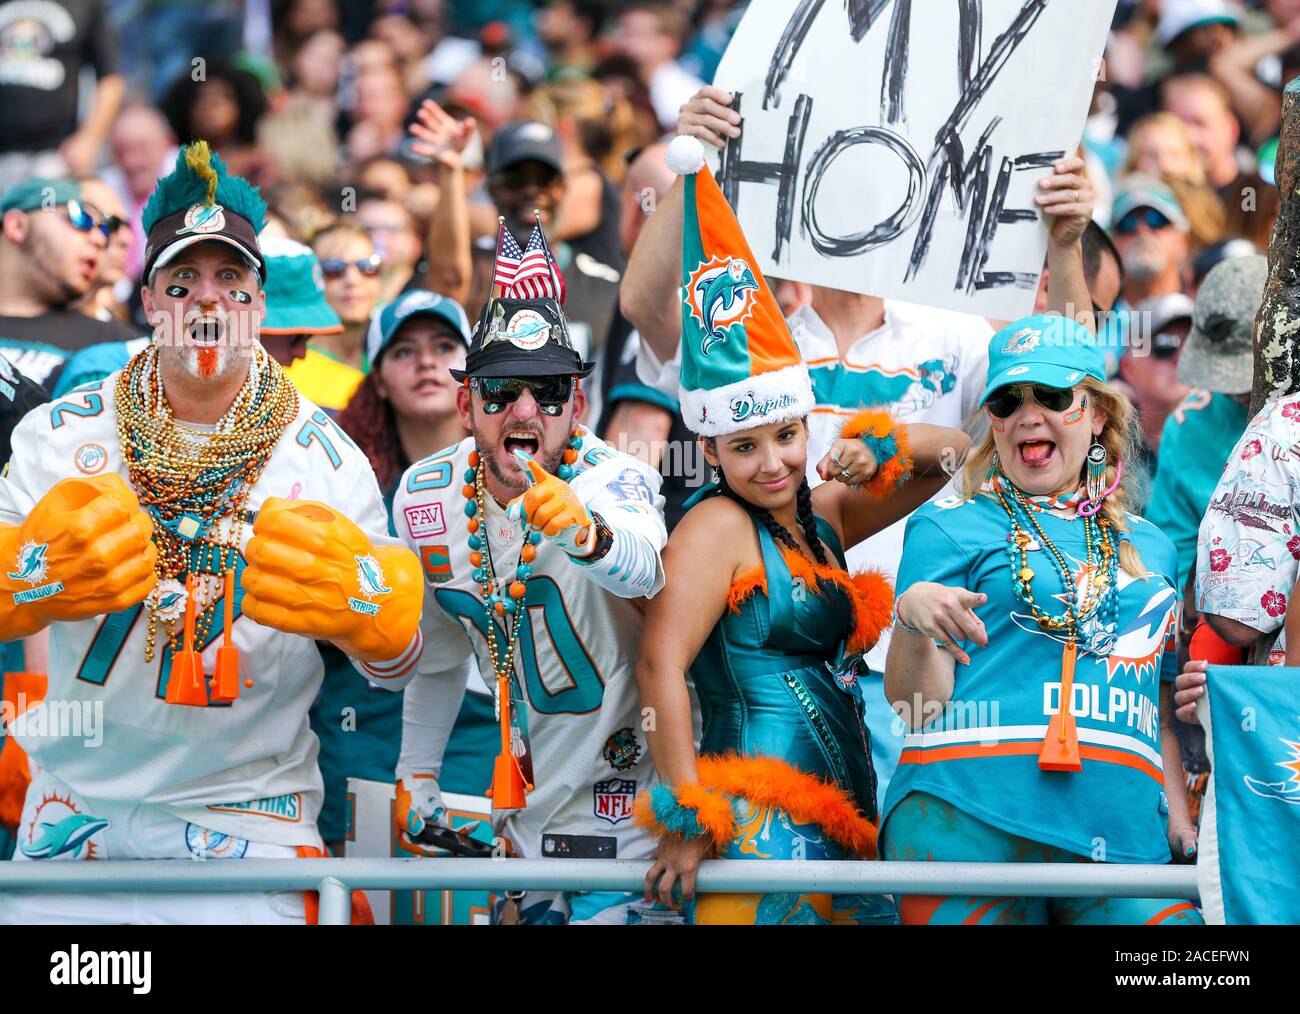 Miami Gardens, USA. 1st Dec, 2019. Miami Dolphins fans pose for the camera during an NFL football game between the Dolphins and Philadelphia Eagles at Hard Rock Stadium in